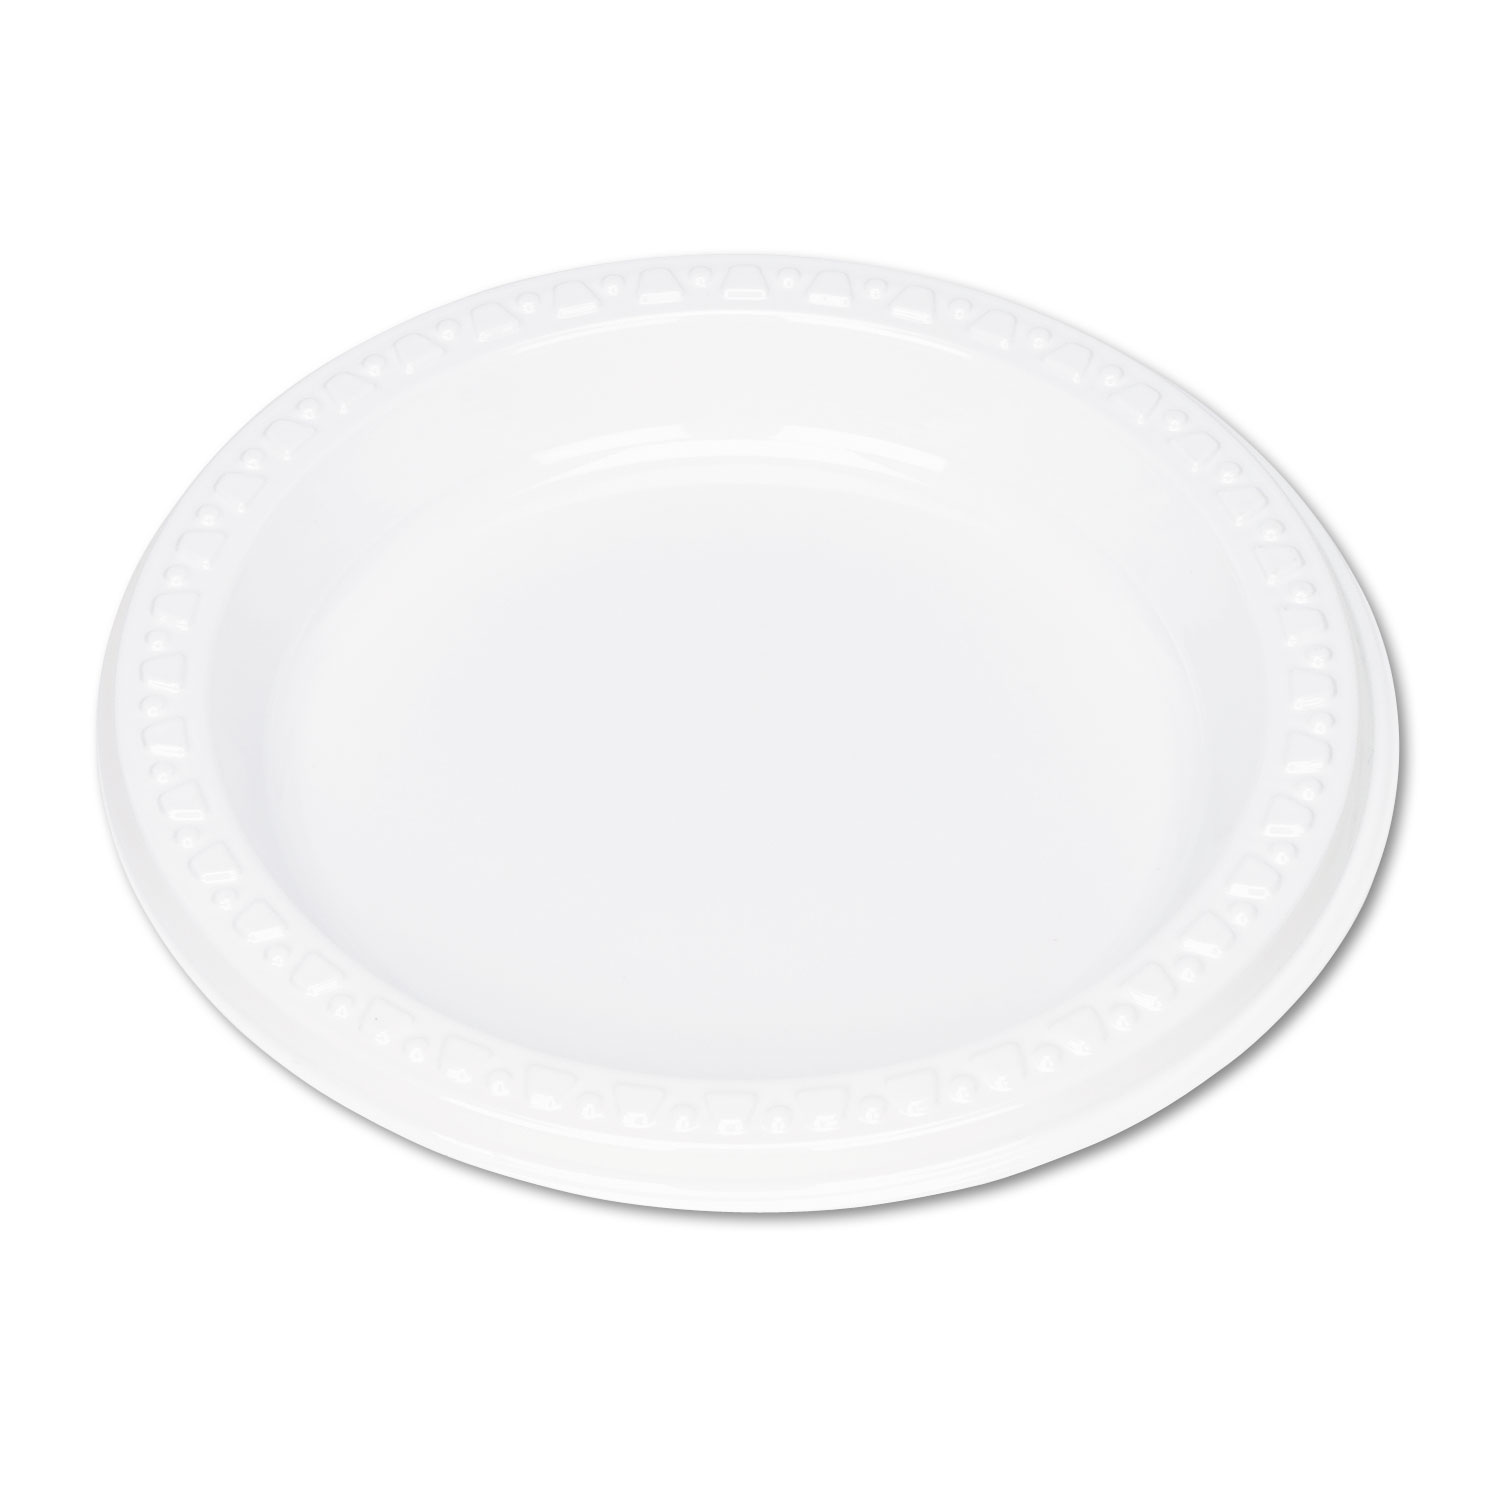  Tablemate 6644WH Plastic Dinnerware, Plates, 6 dia, White, 125/Pack (TBL6644WH) 